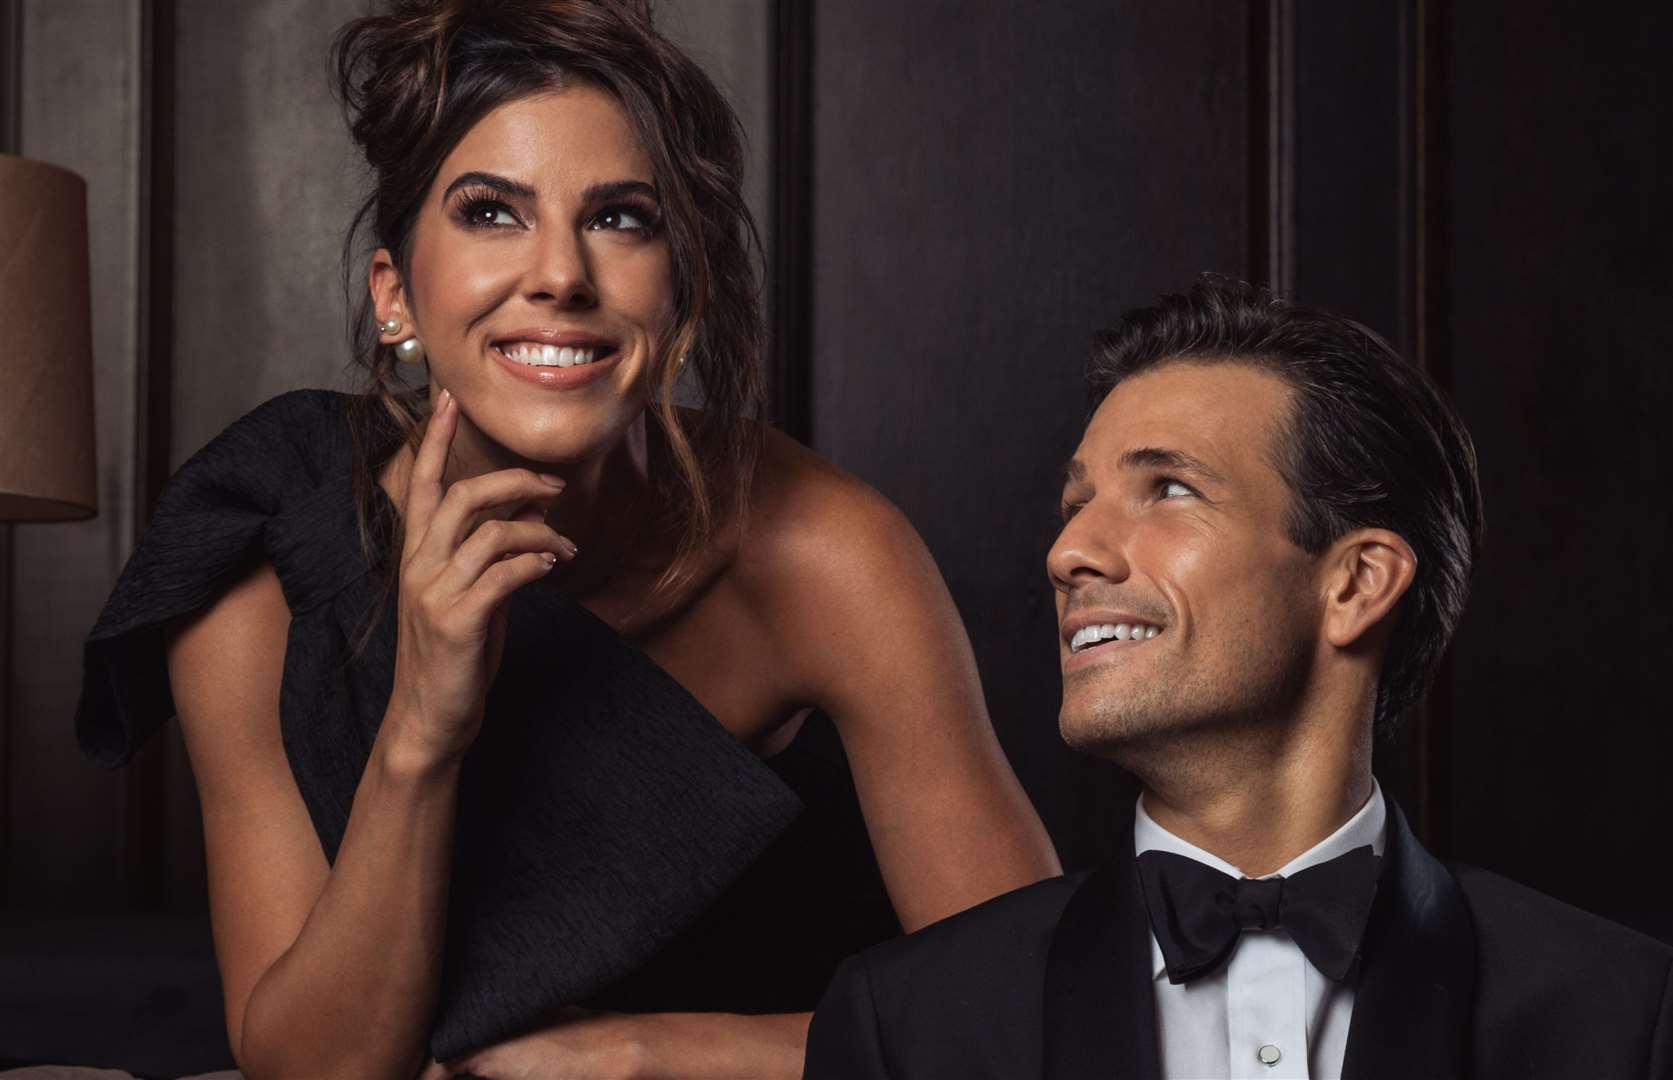 Danny Mac and Aimie Atkinson will take the reins made famous by Richard Gere and Julia Roberts.